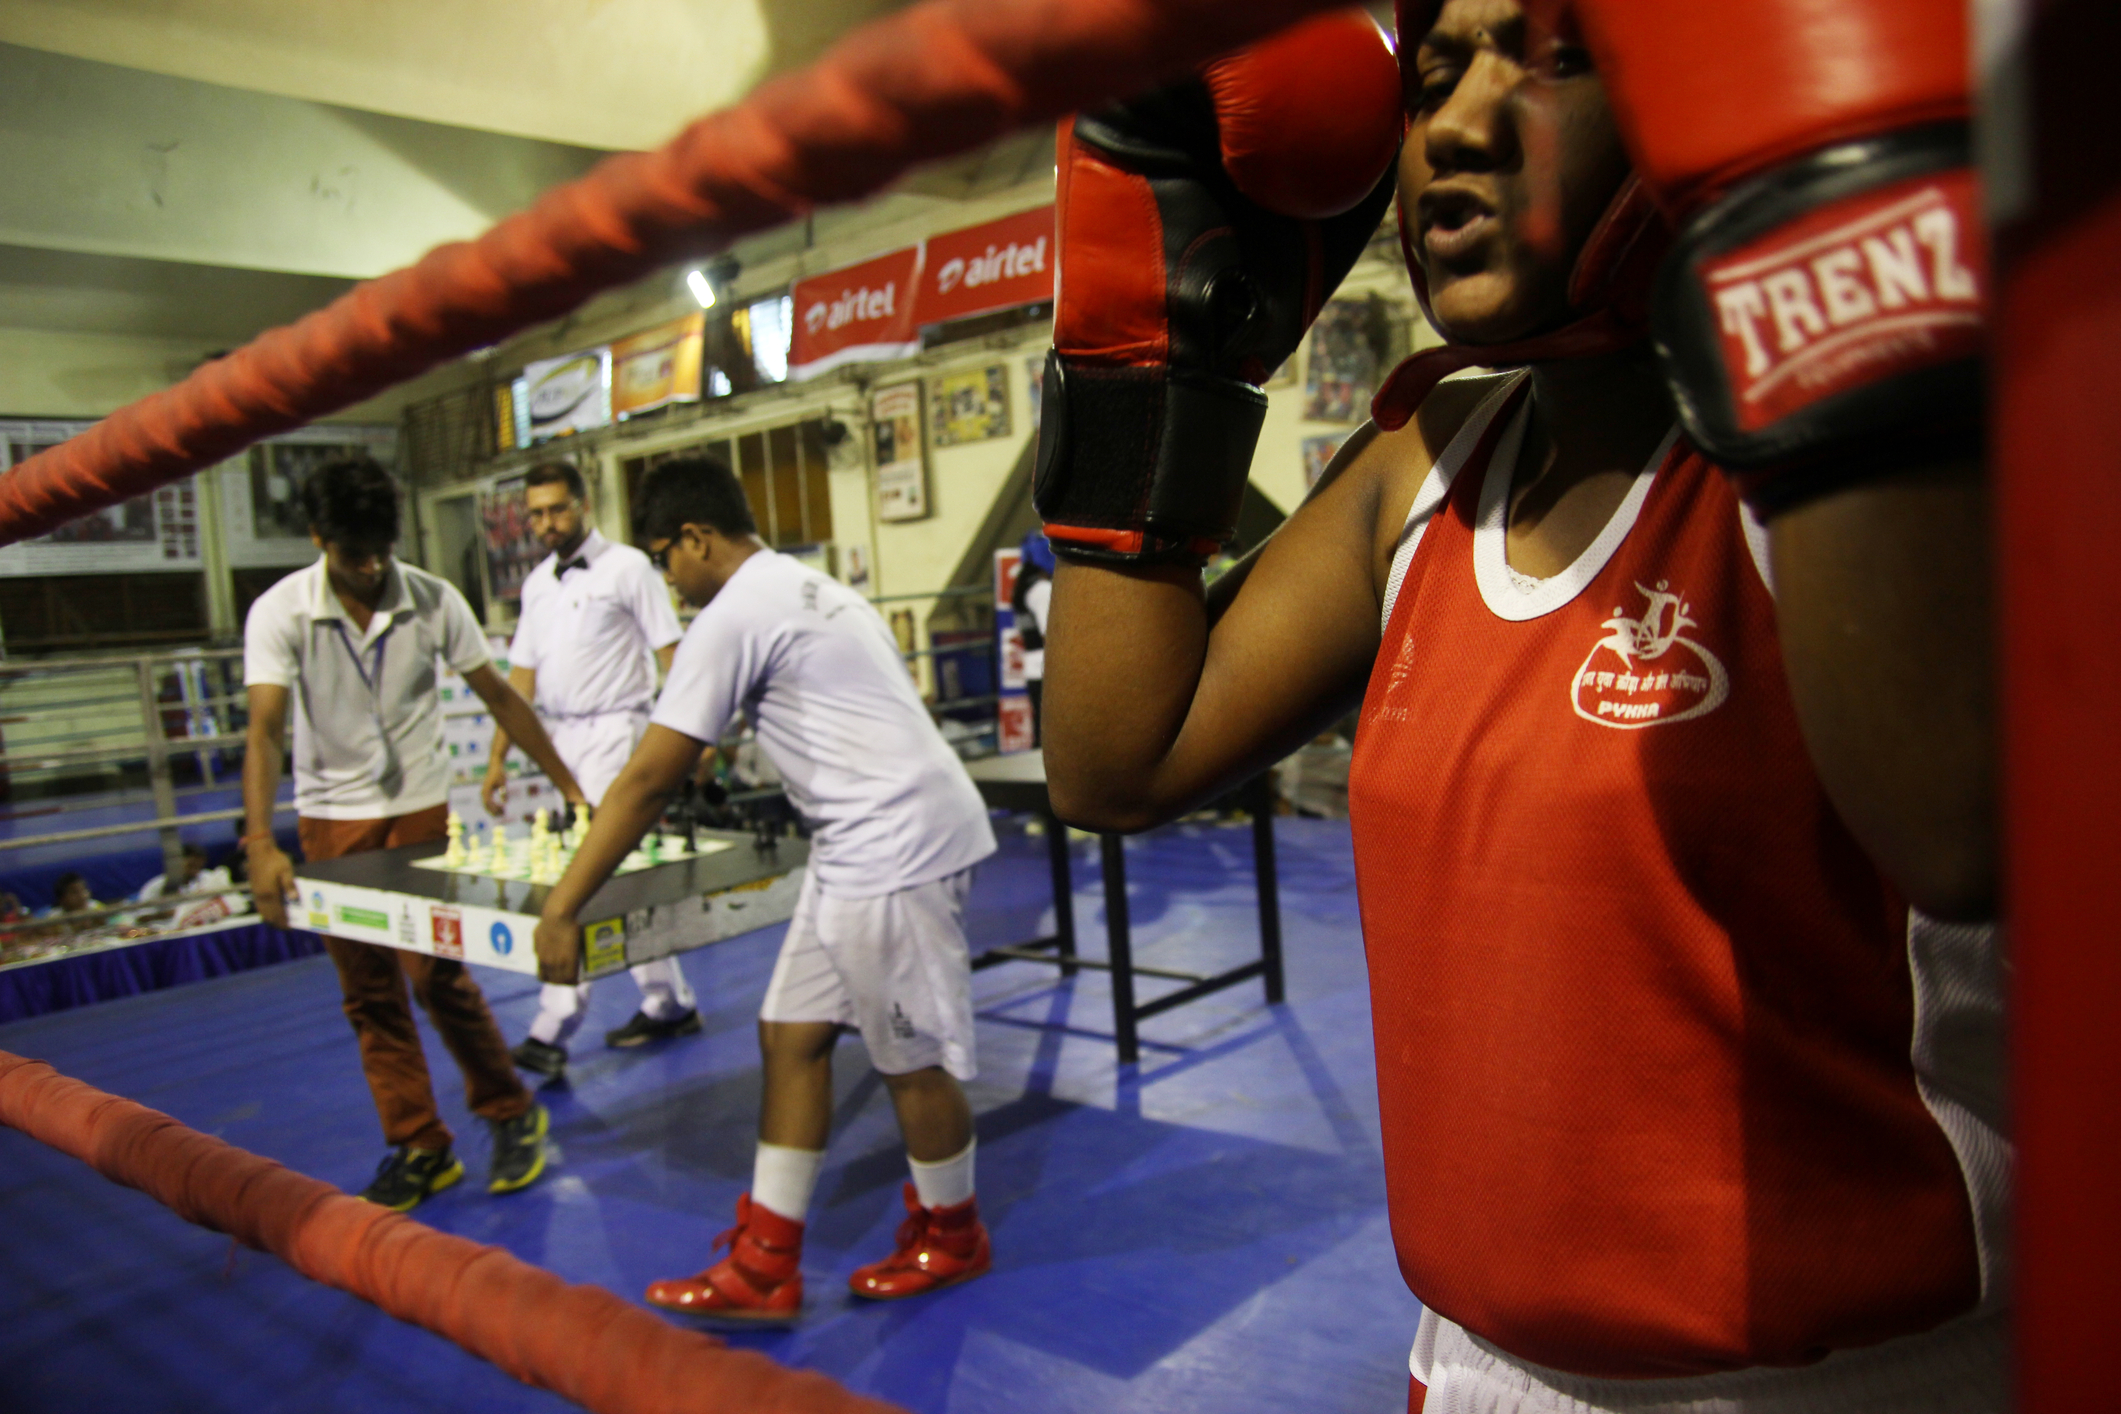 Chess boxing, sport